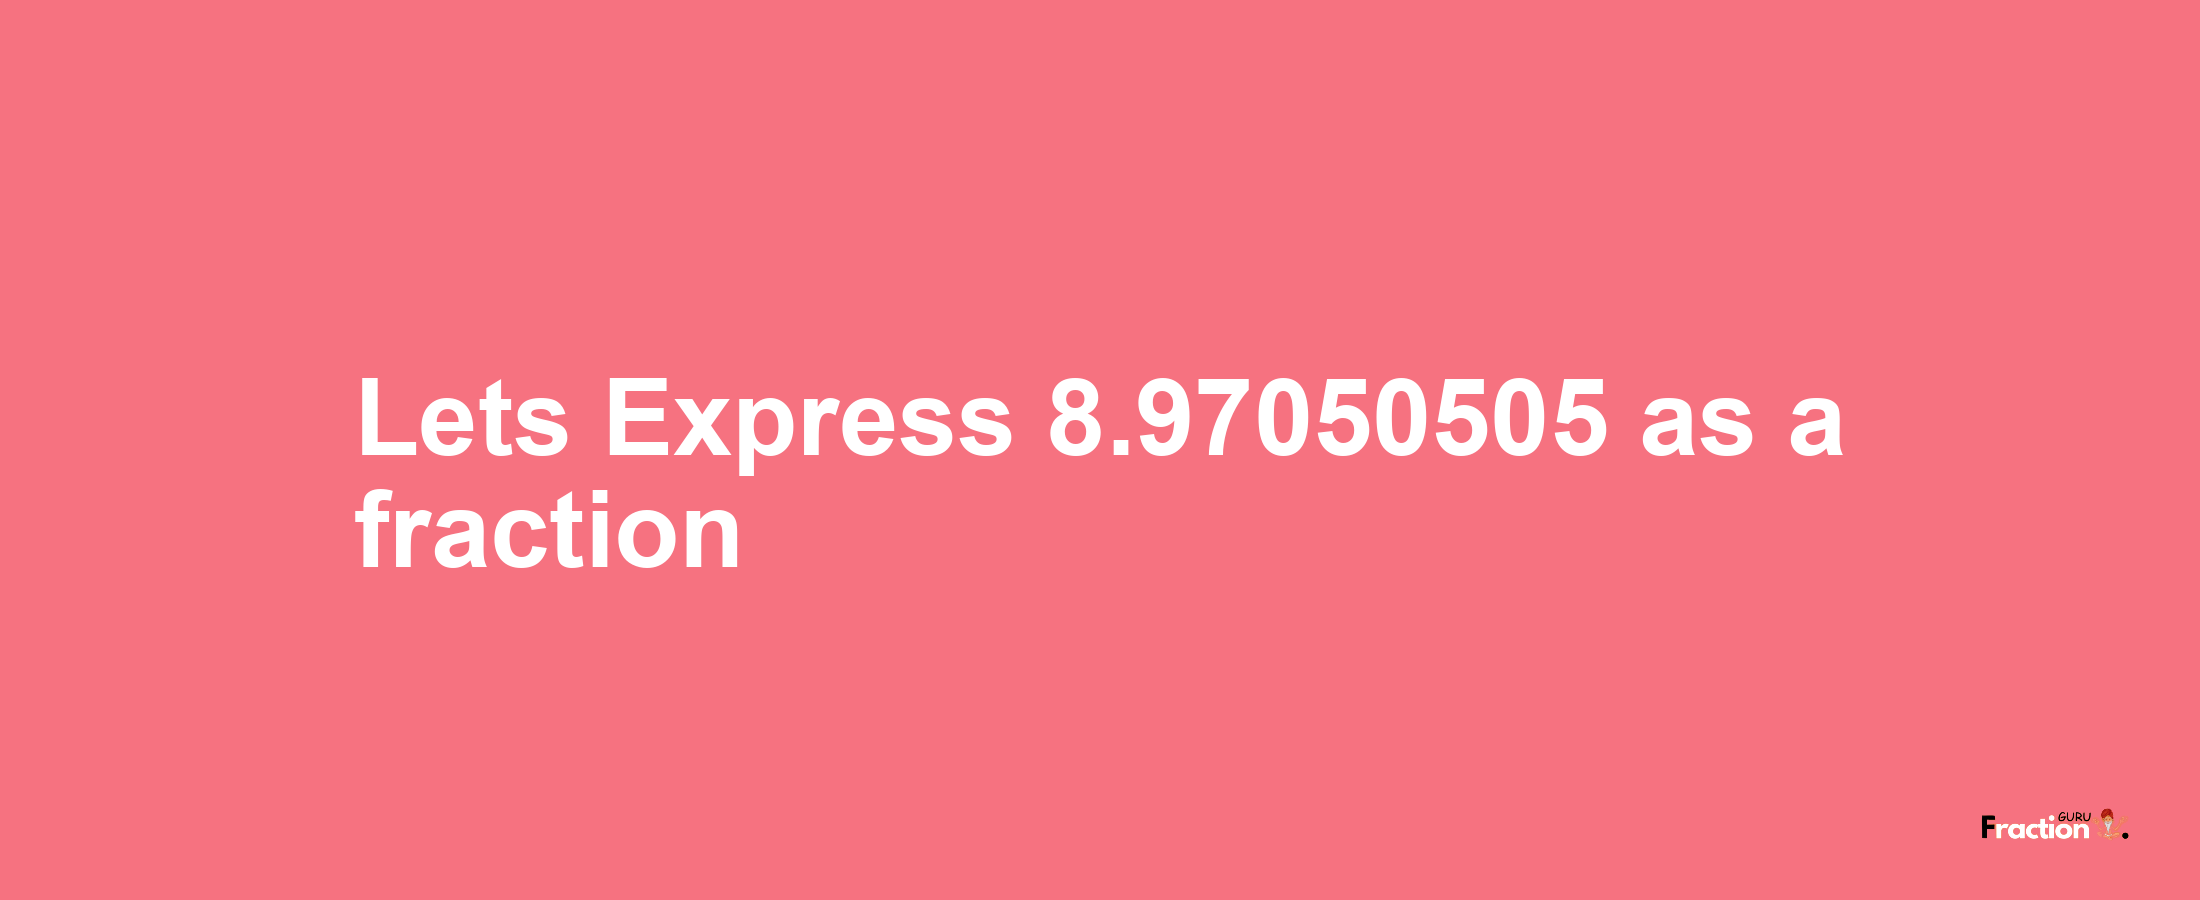 Lets Express 8.97050505 as afraction